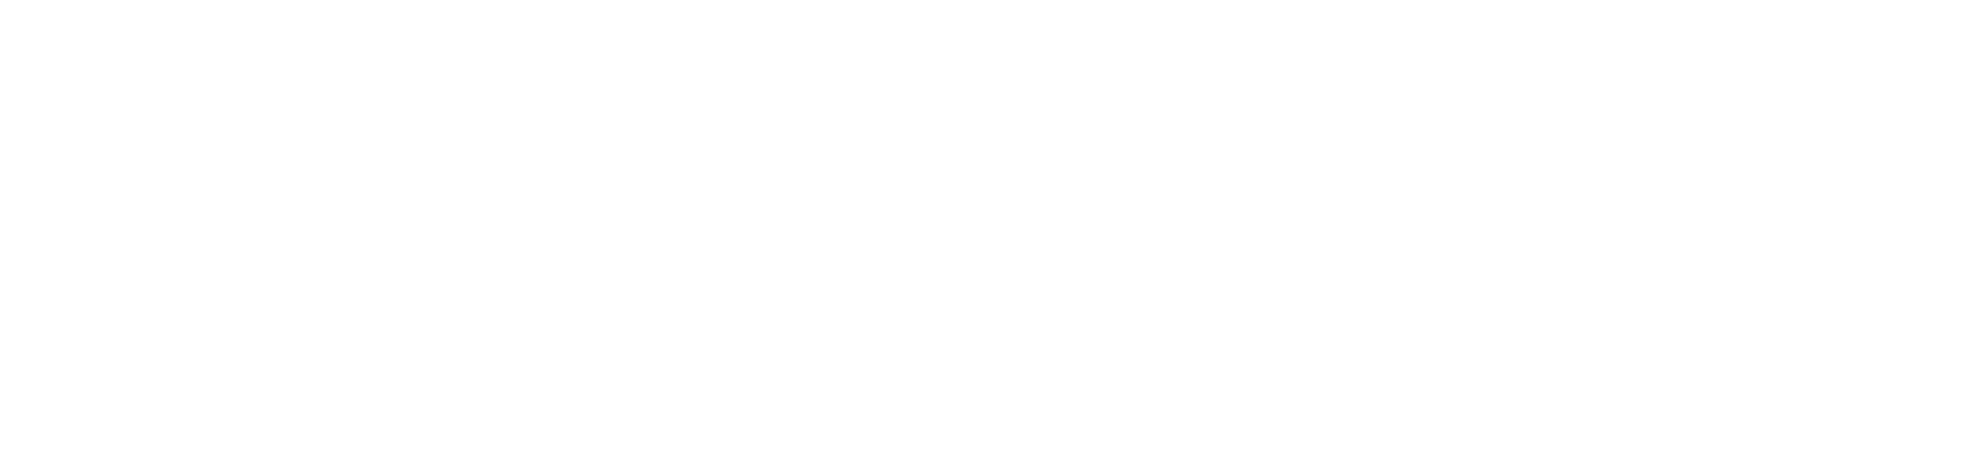 Boys & Girls Clubs of the Twin Cities